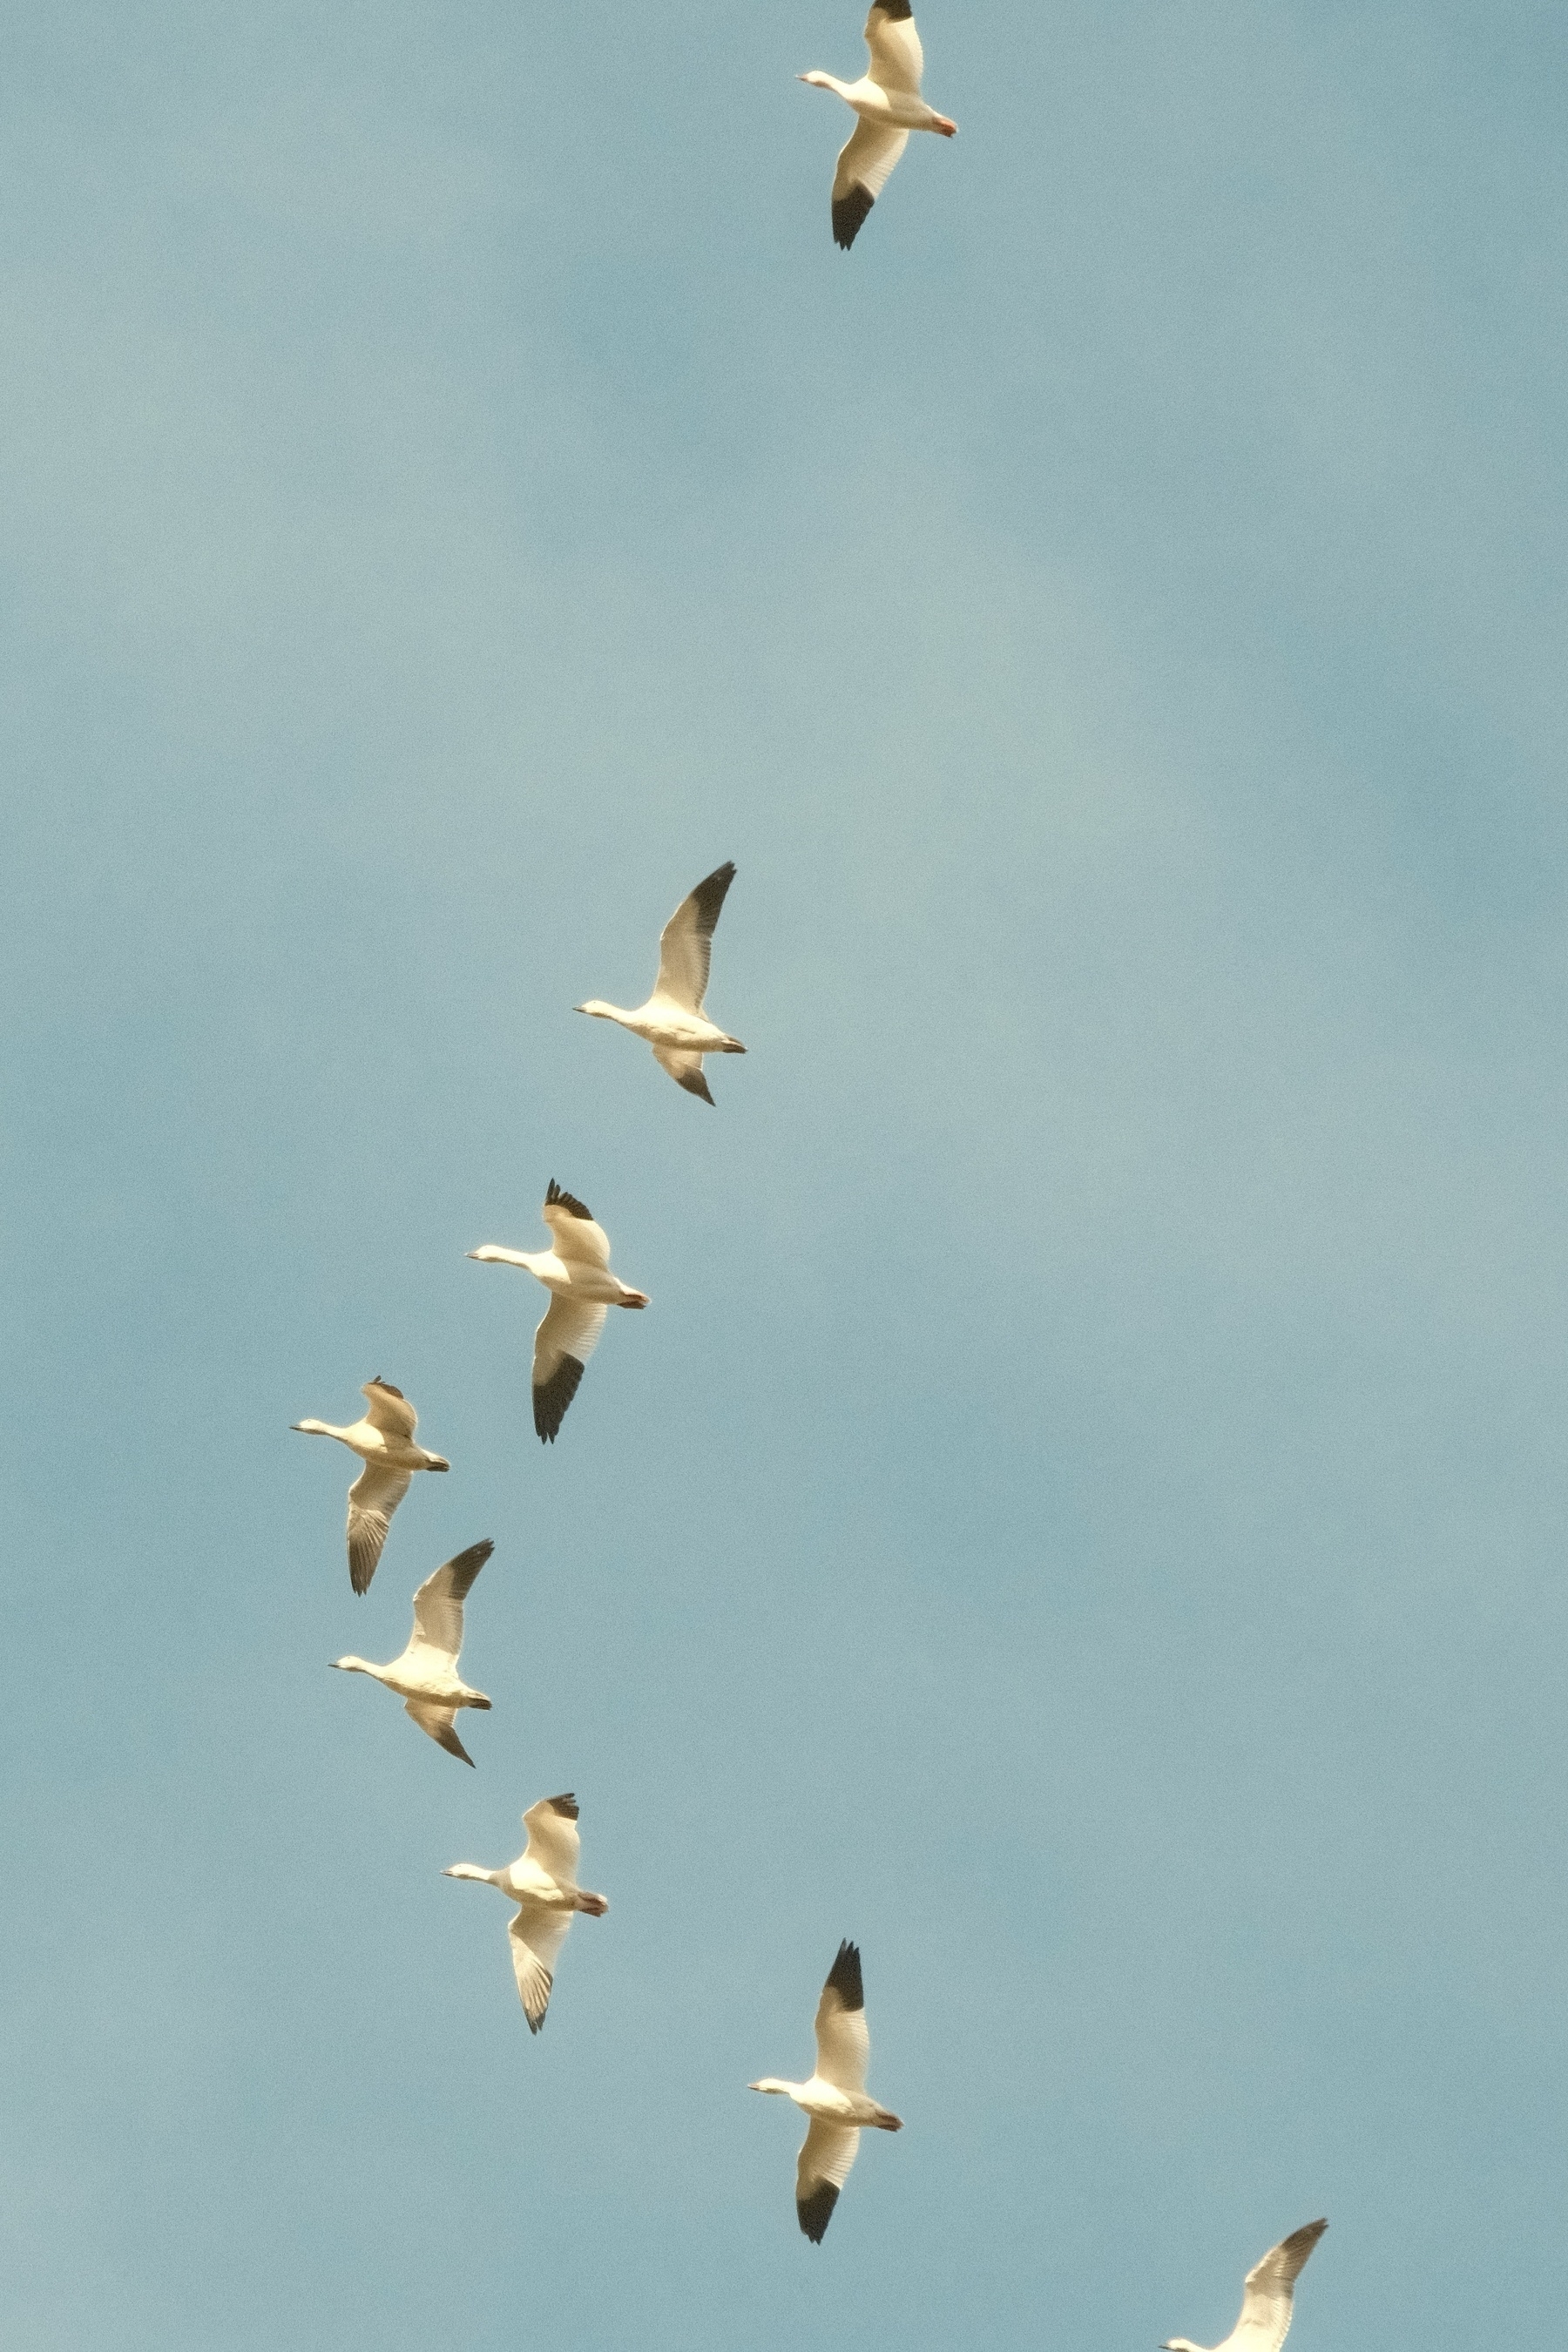 Snow Geese fly above in a haphazard V formation. They’re all white with black wing tips. The sky is blue with wispy clouds.